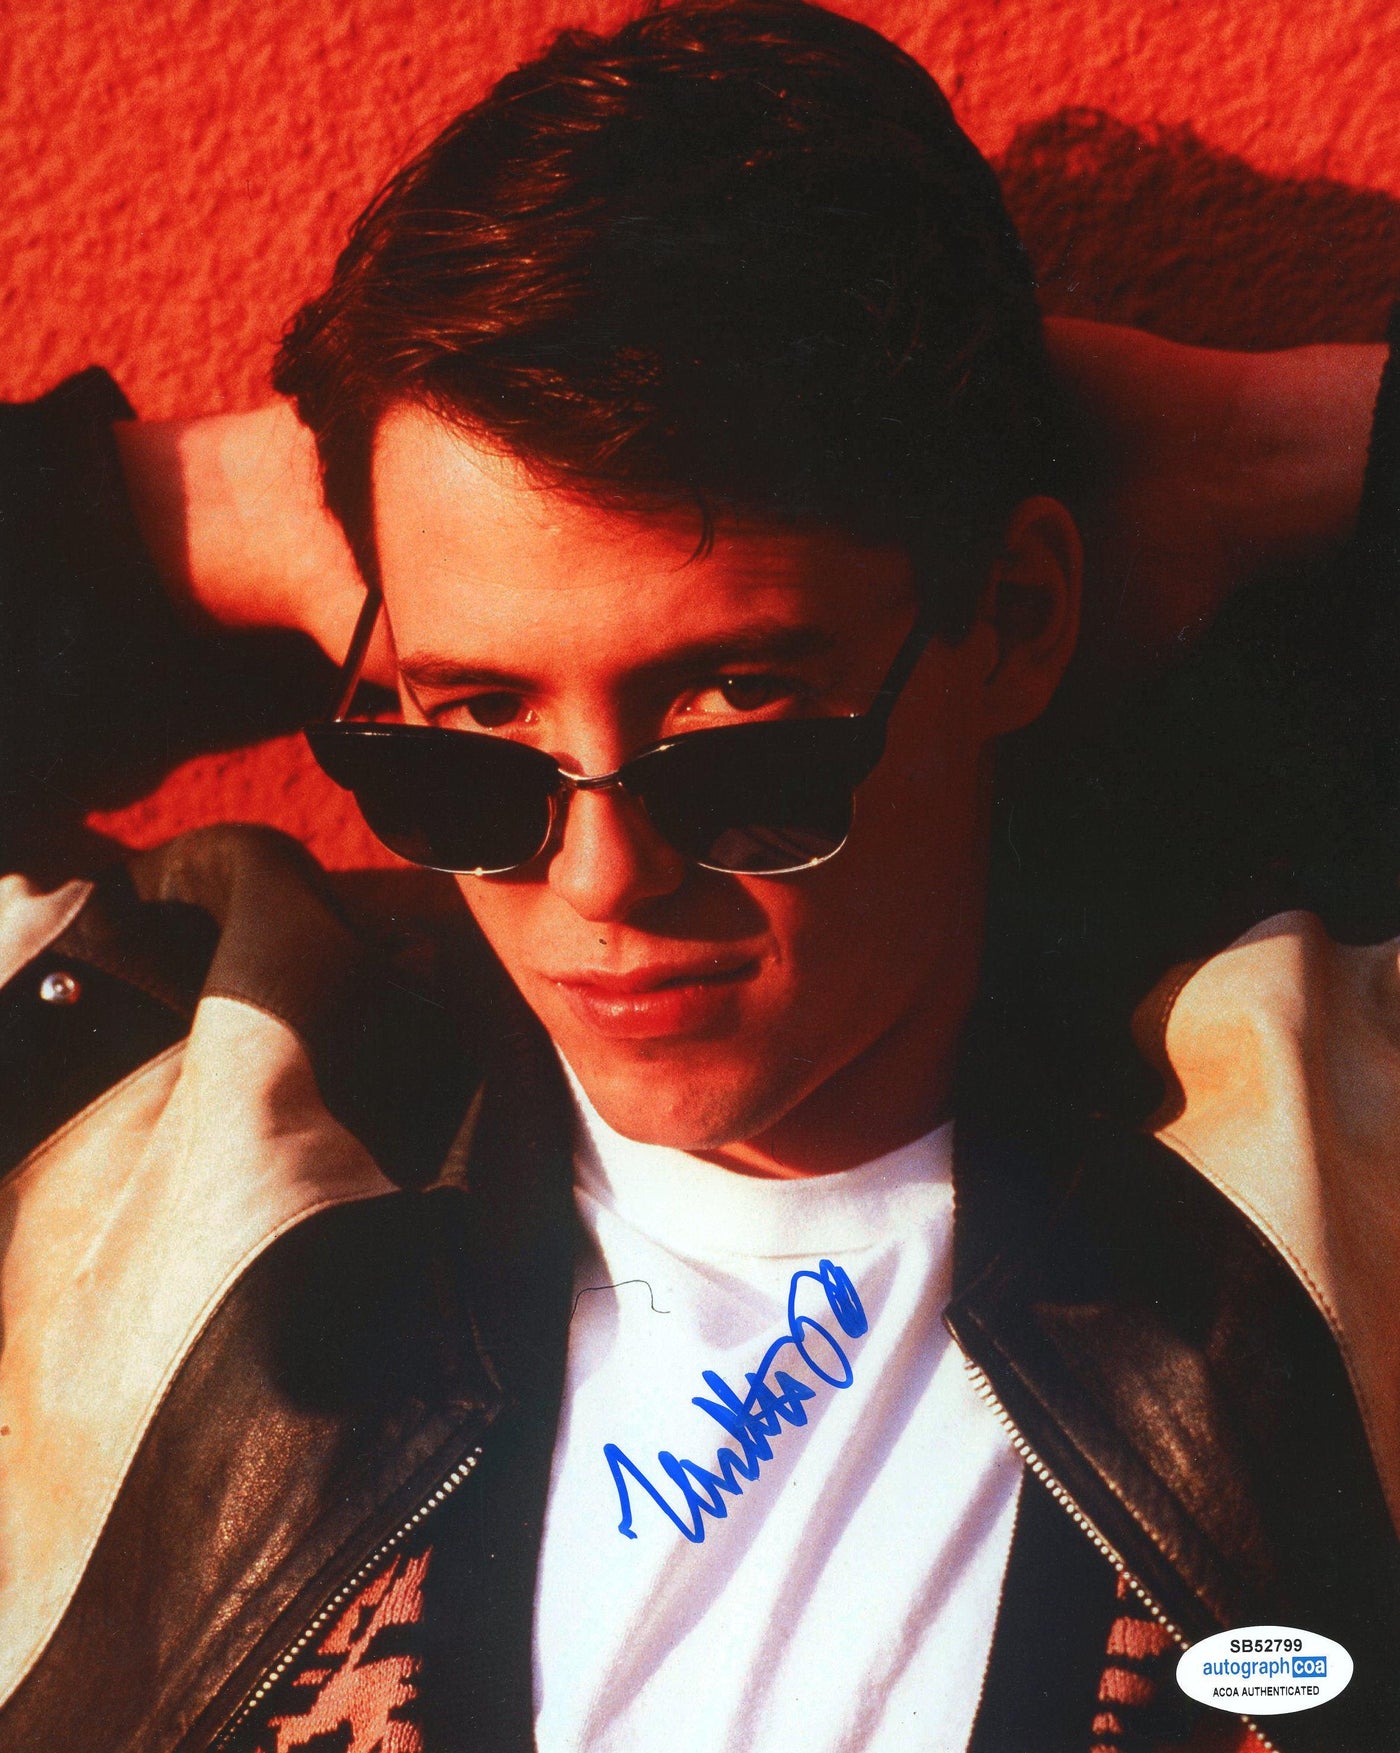 Matthew Broderick Signed 8x10 Photo Ferris Bueller's Day Off Autographed ACOA 4